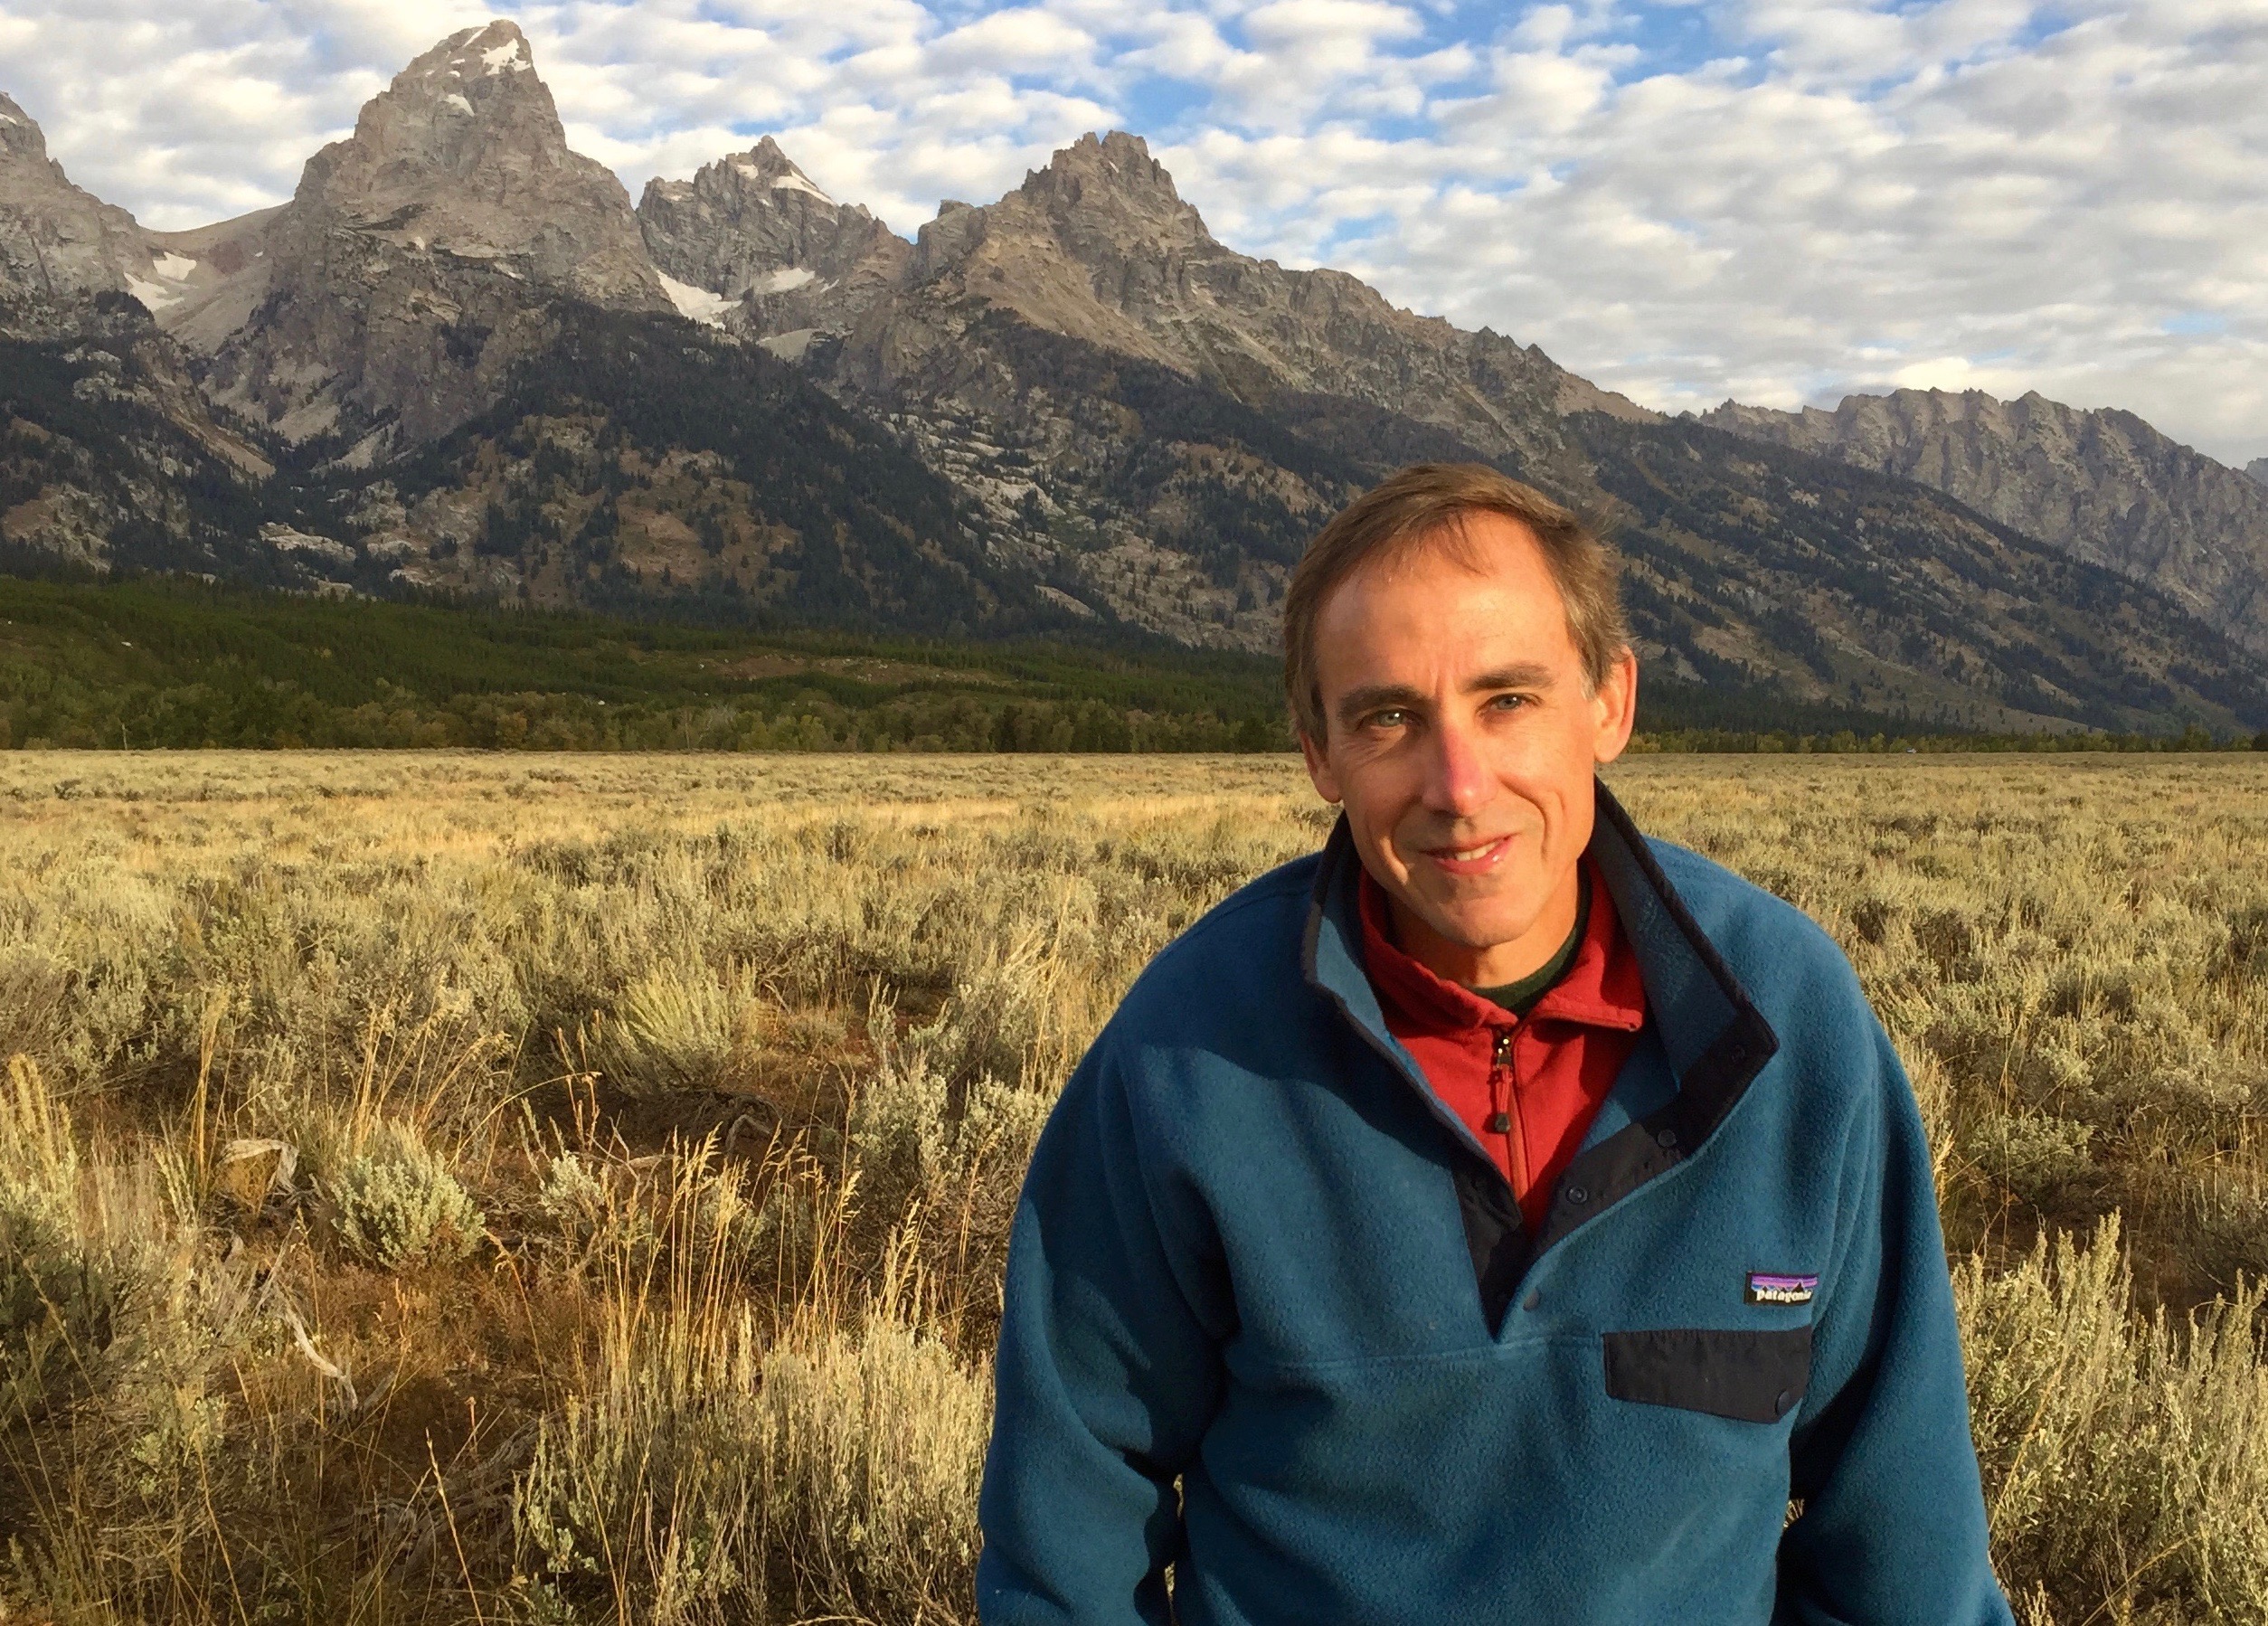 Todd Wilkinson smiles for the camera while sitting in a sunny field at the base of the Tetons.